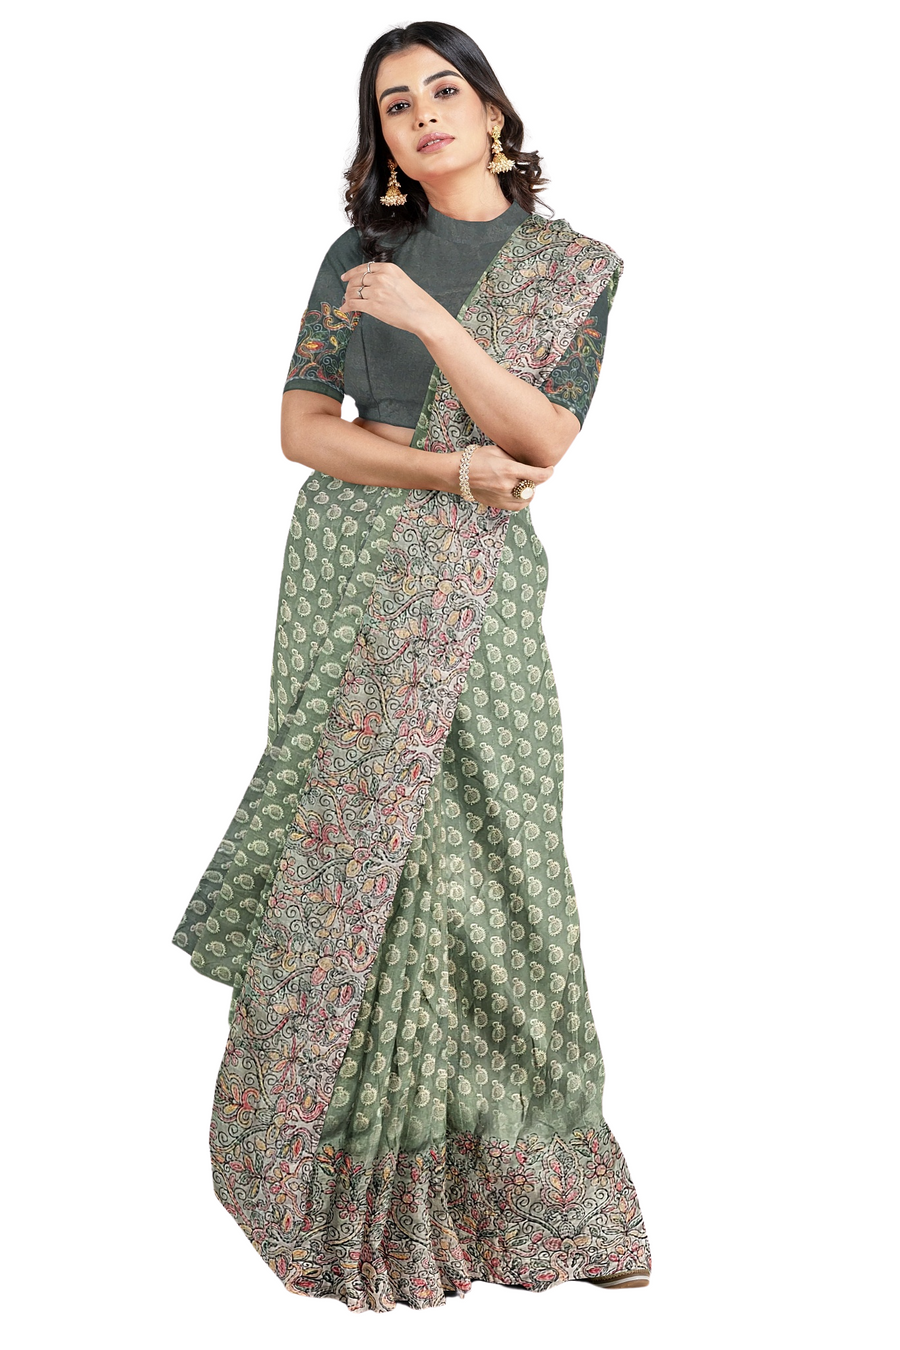 Tripur Silk Saree by Sarandhri With An Intricate Embroidered Border Charan Kamal Emerald Elegance x One Blouse